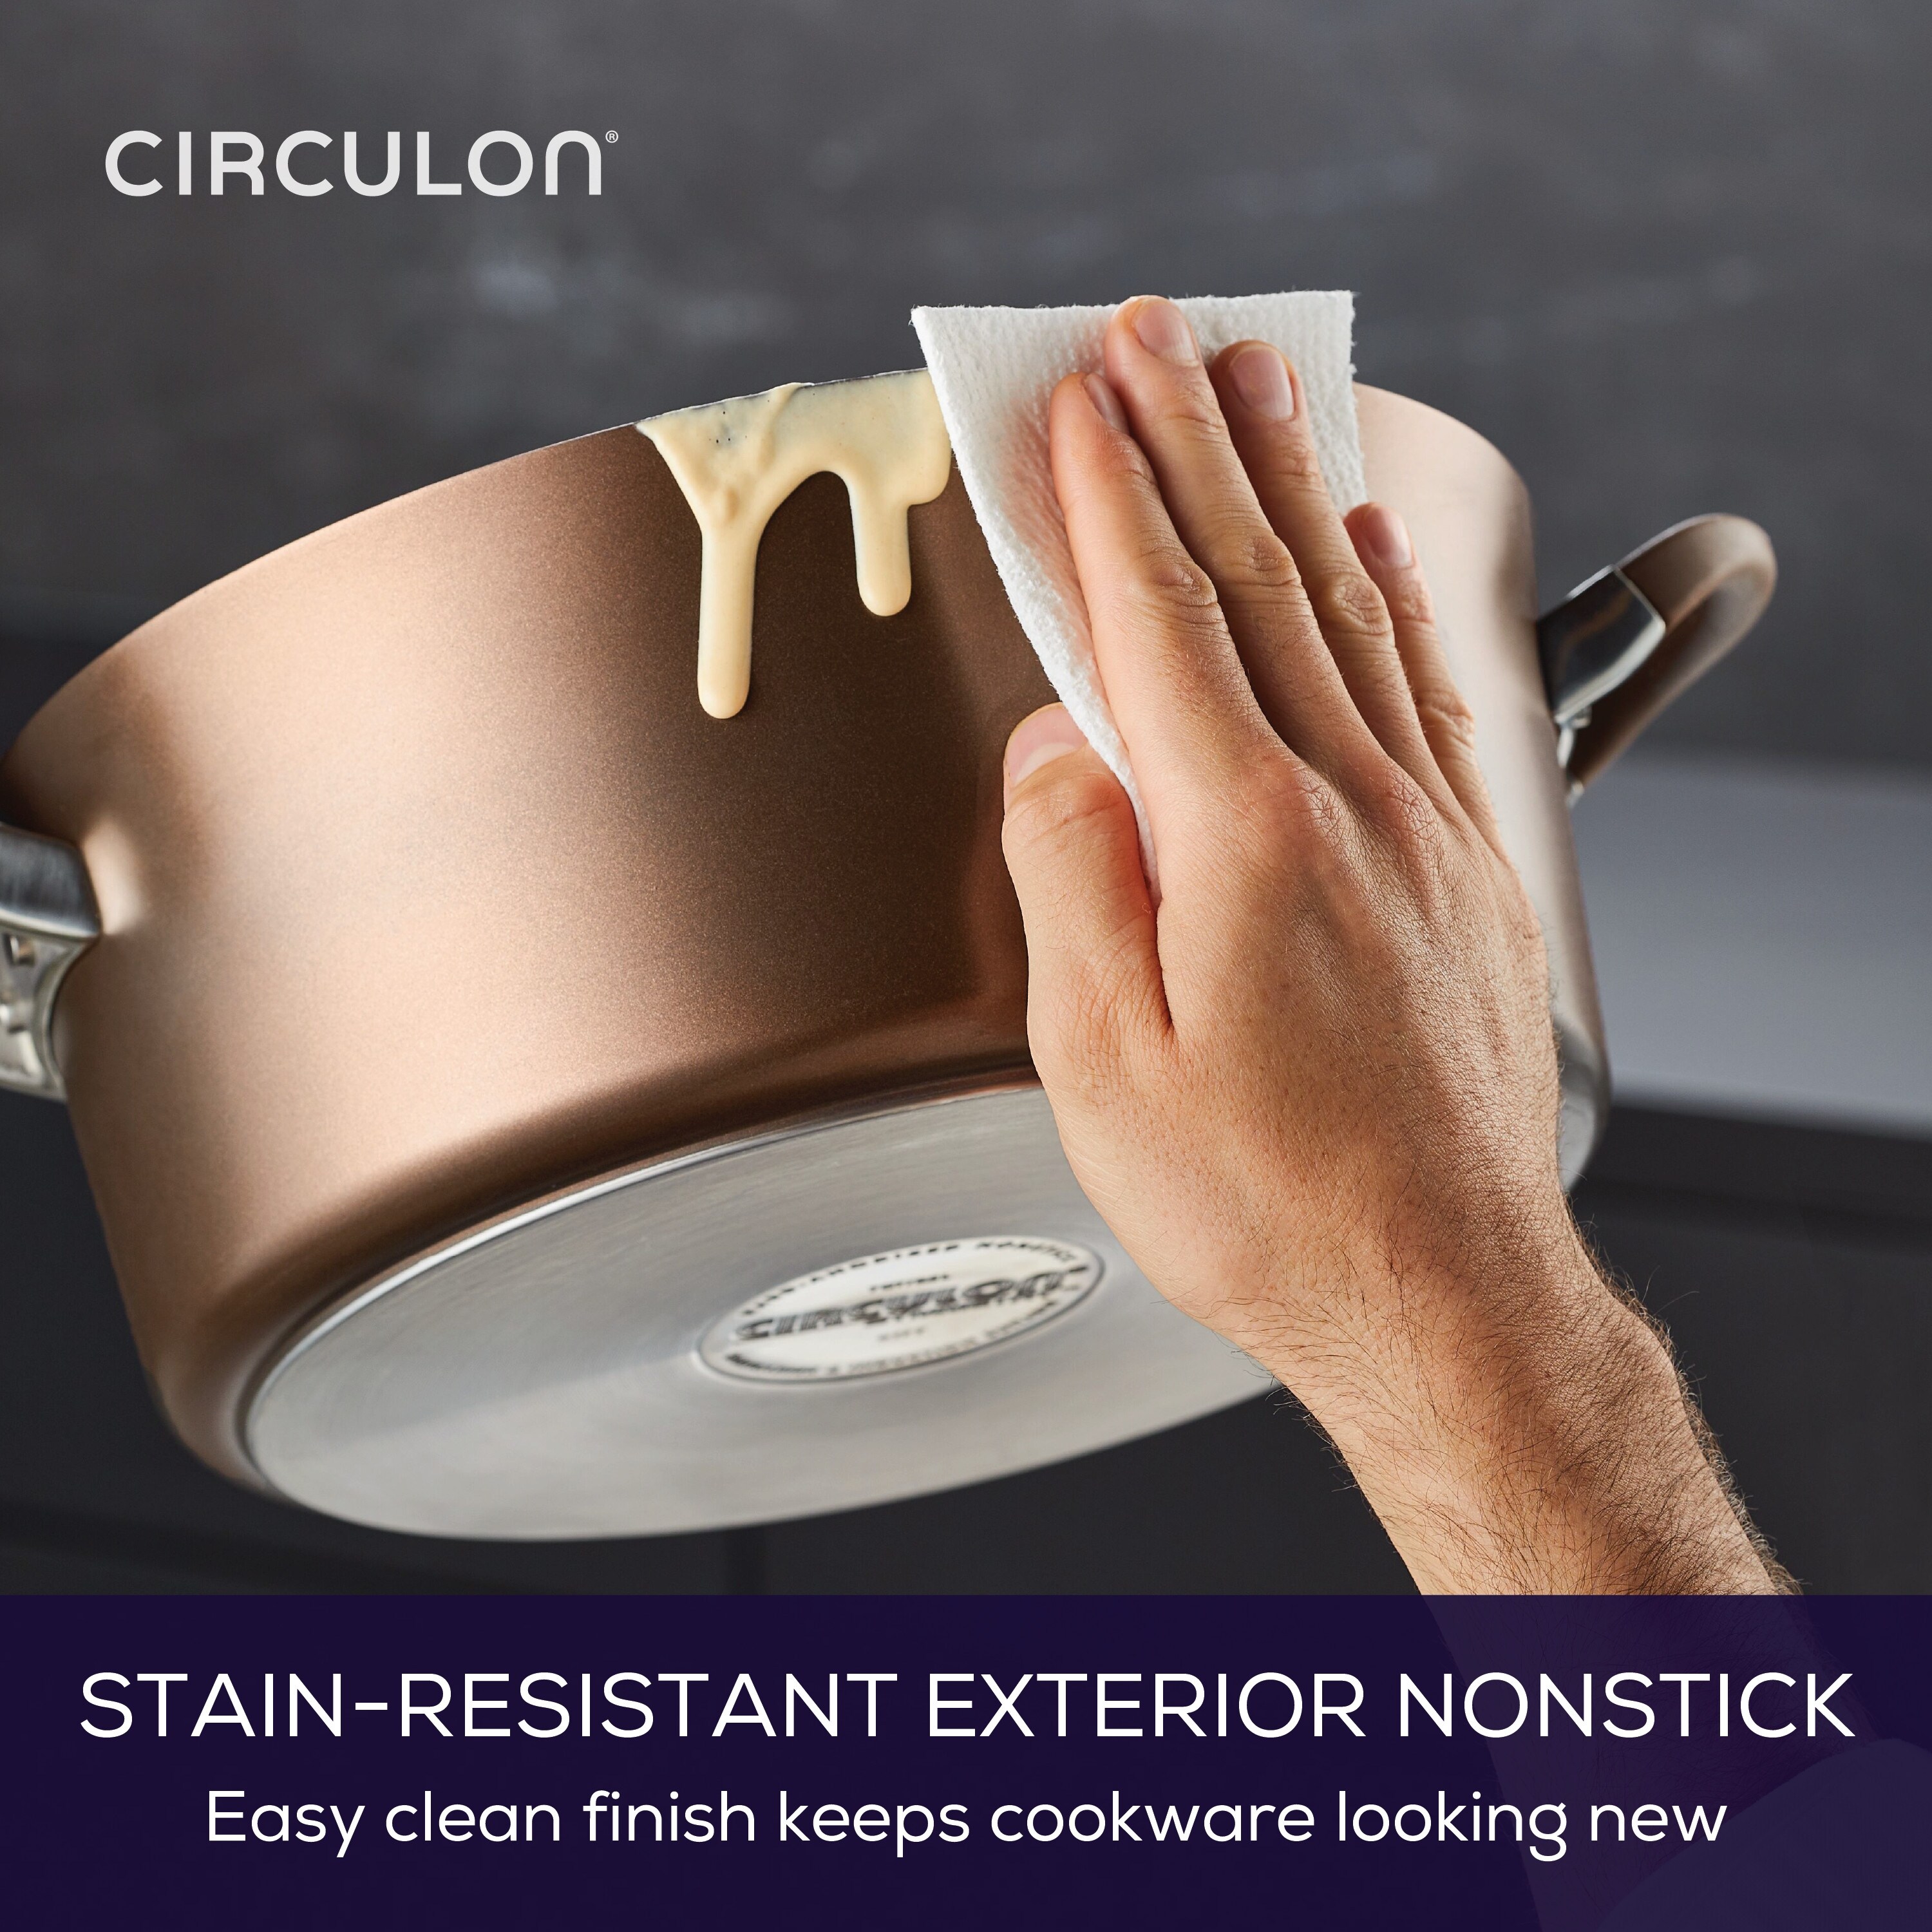 https://ak1.ostkcdn.com/images/products/is/images/direct/f9c901305a047d432de4e6b0025f2e3b71839b4a/Circulon-Symmetry-Hard-Anodized-Nonstick-Induction-Dutch-Oven-with-Lid%2C-7-Quart%2C-Chocolate.jpg